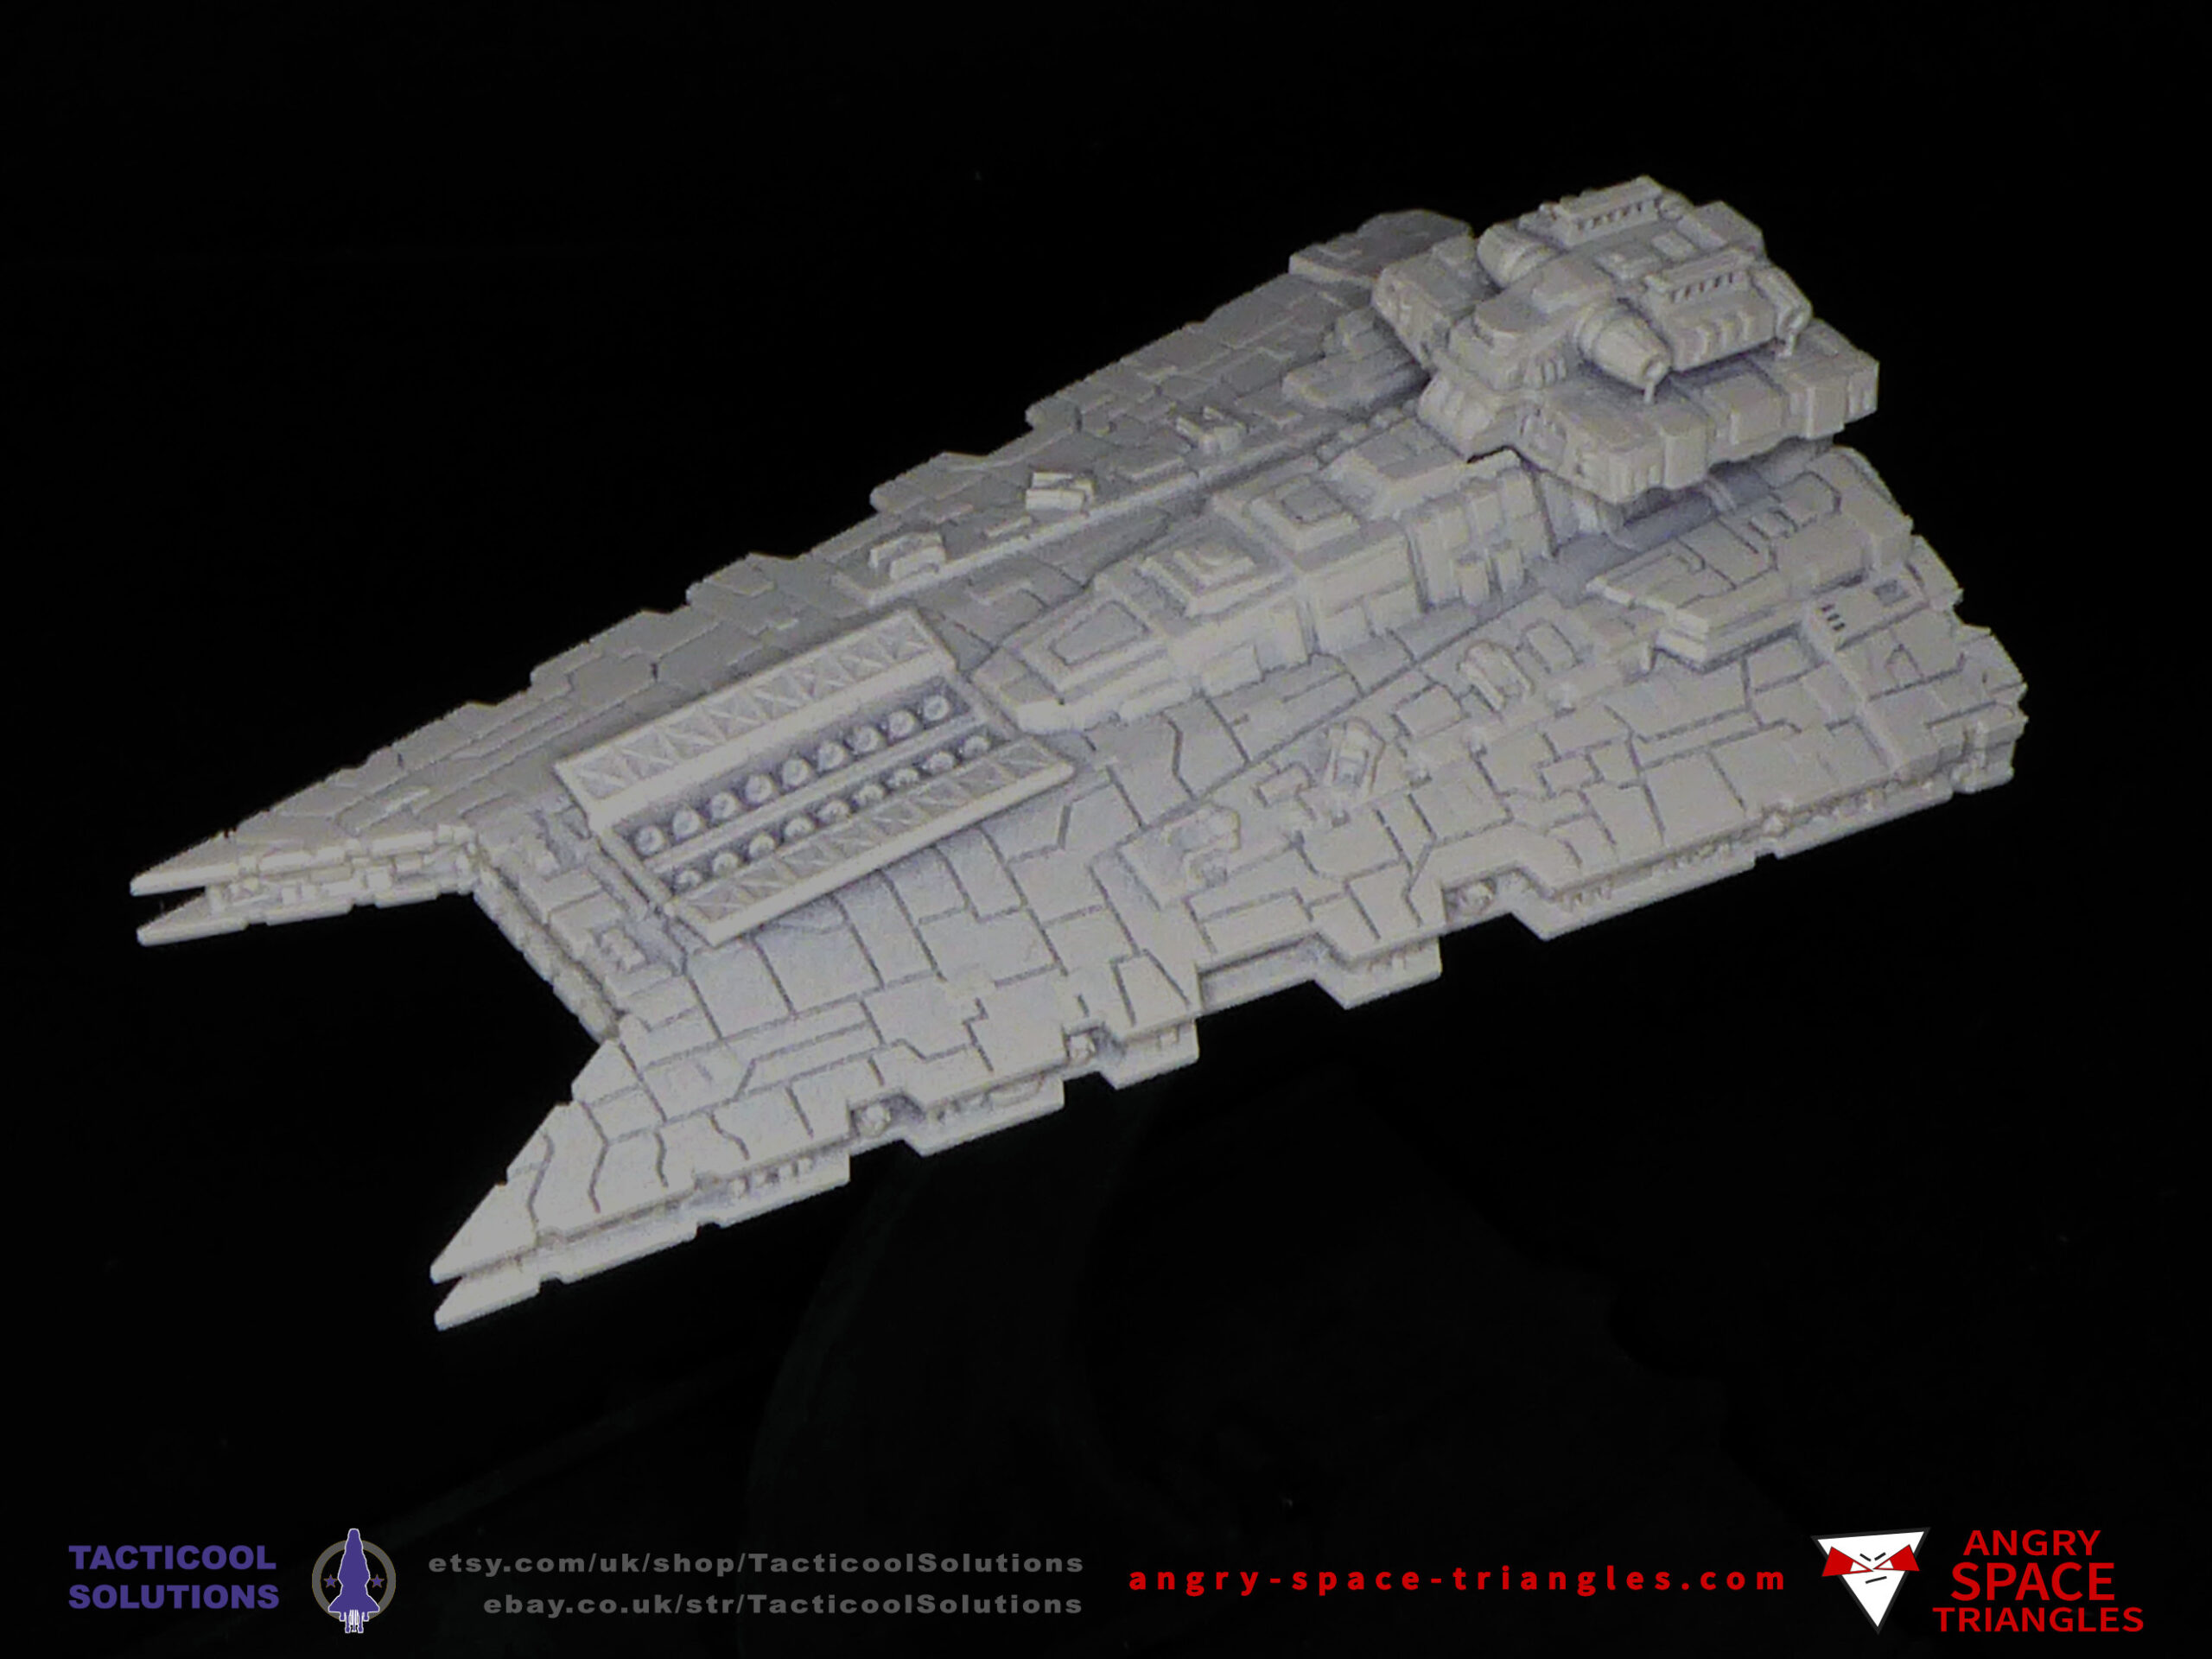 A 3D Printed Gladiator Star Destroyer from Tacticool Solutions